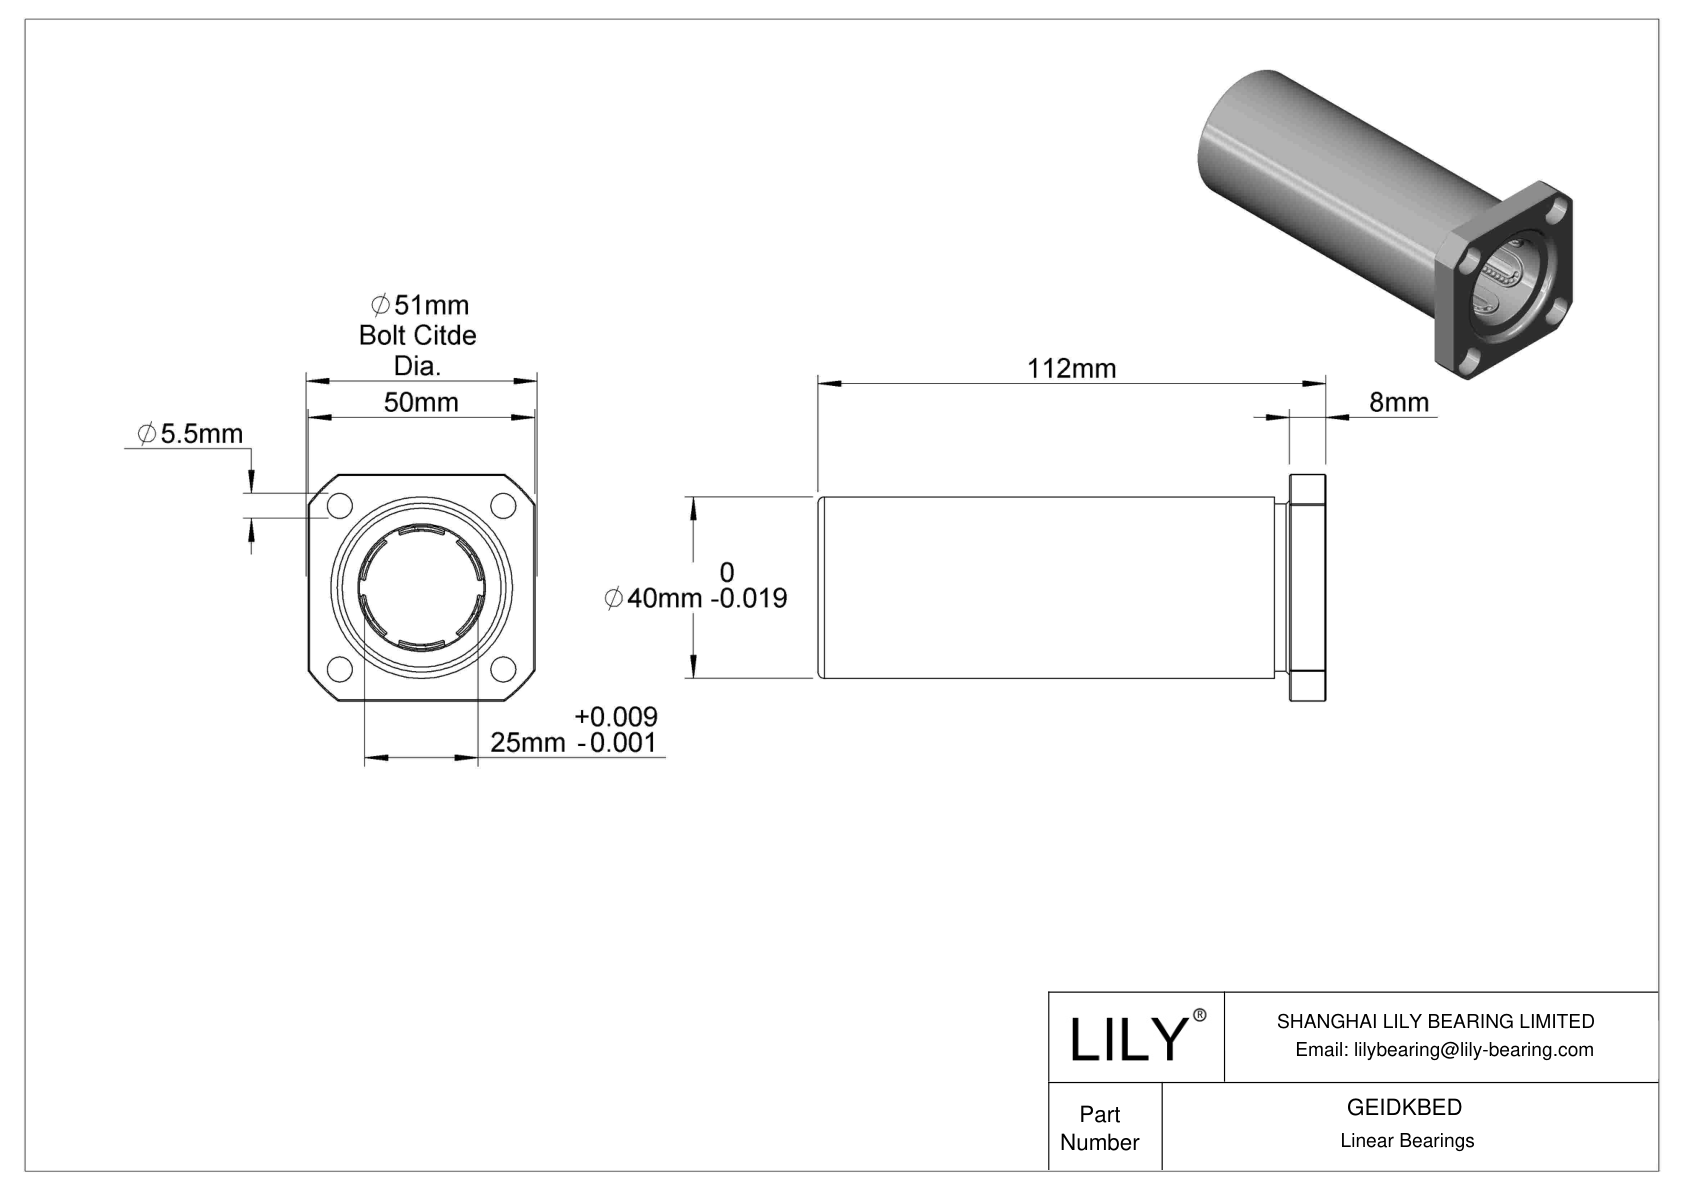 GEIDKBED Flange-Mounted Linear Ball Bearings cad drawing